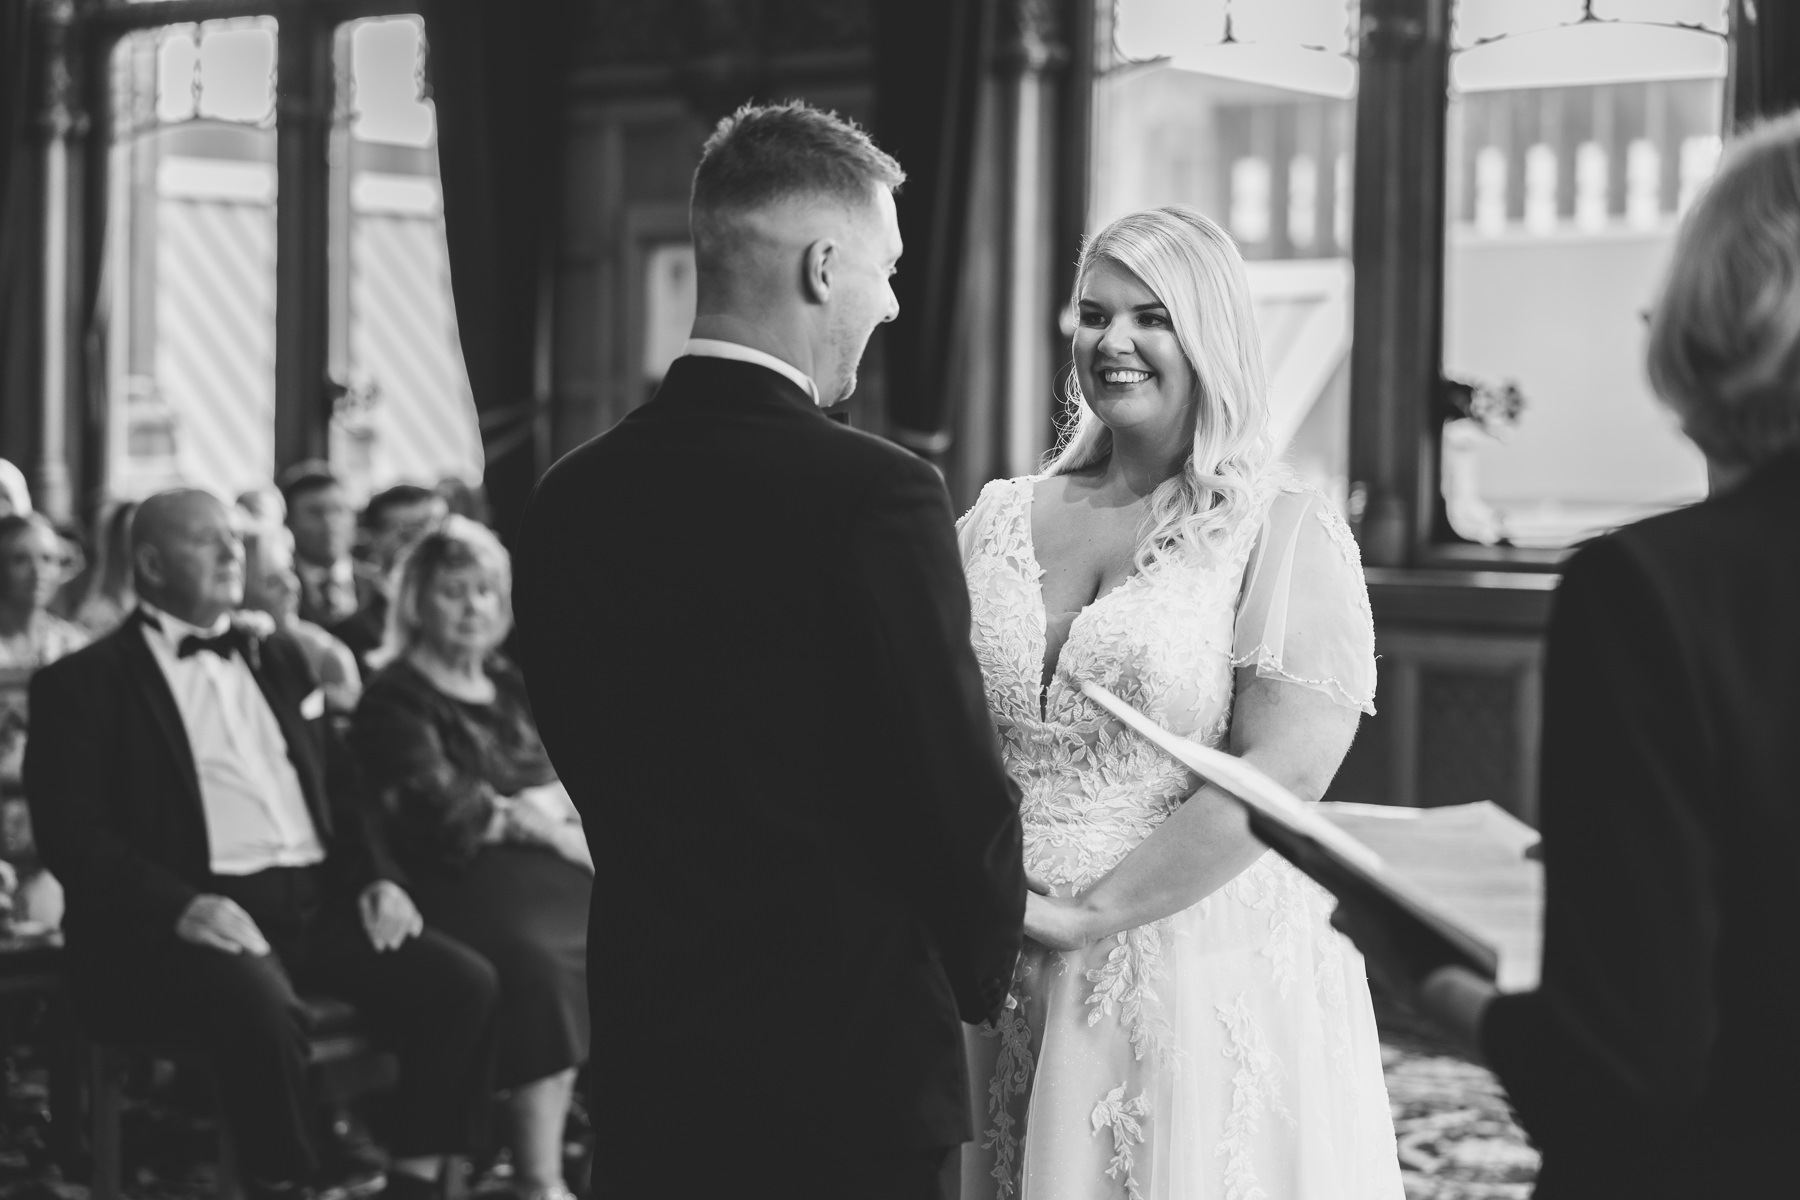 Saying the vows in Chester Town Hall